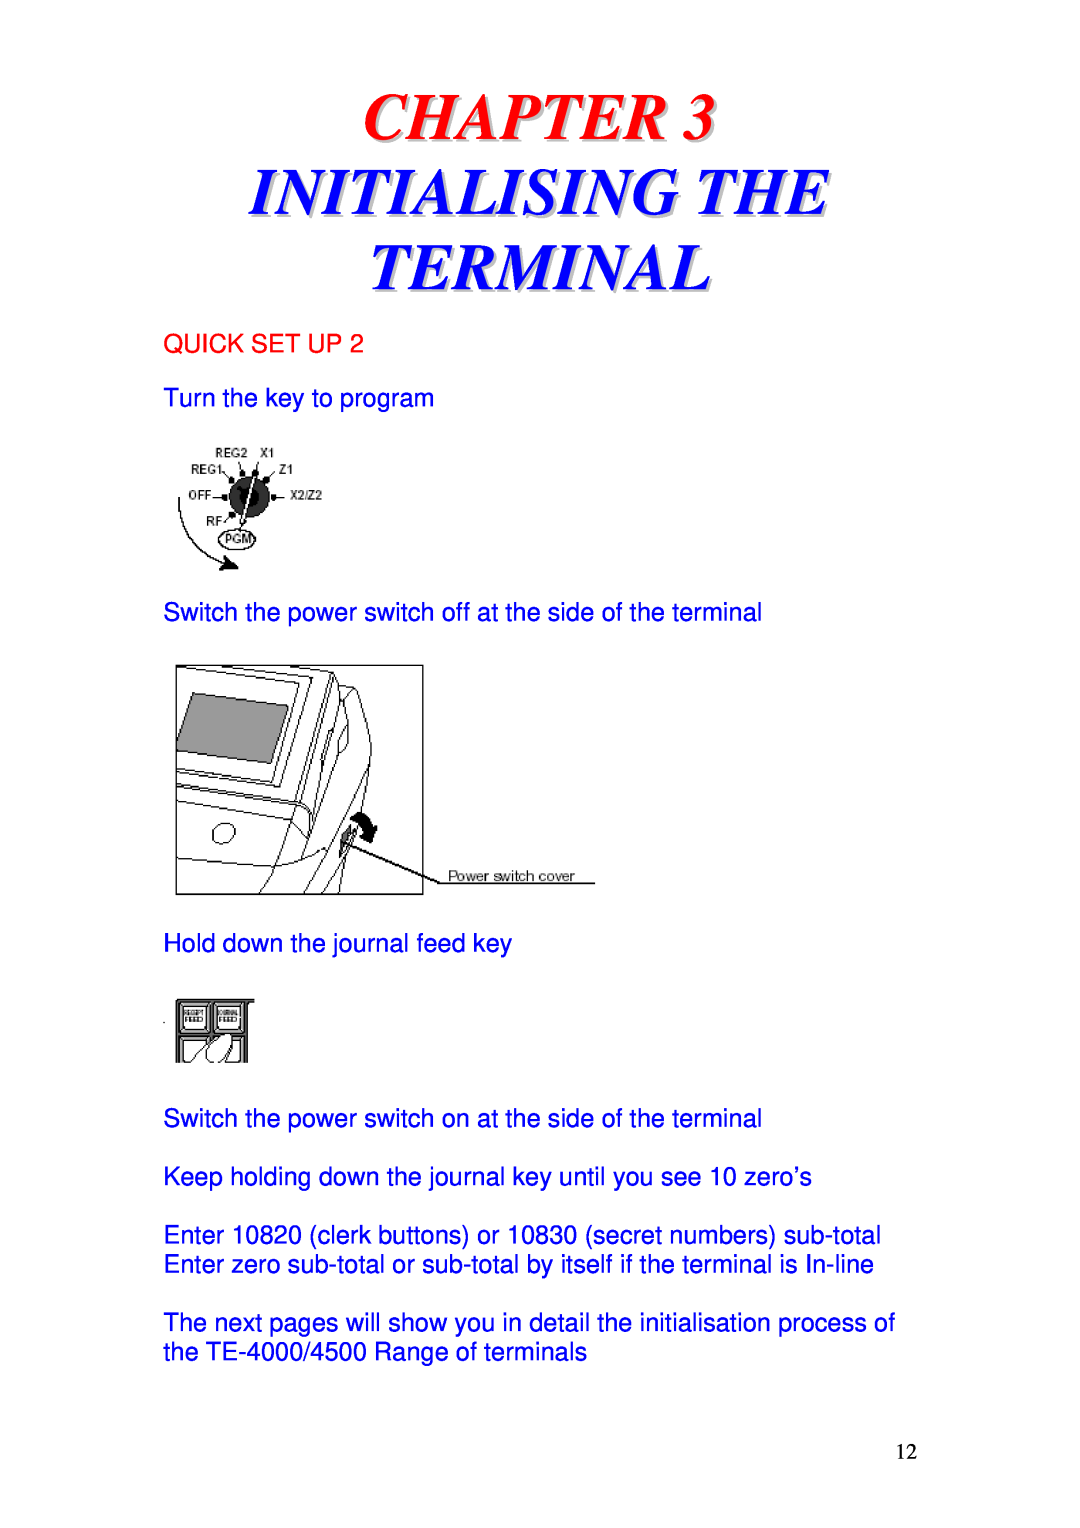 Delta TE-4000 Initialising The Terminal, Turn the key to program, Switch the power switch off at the side of the terminal 